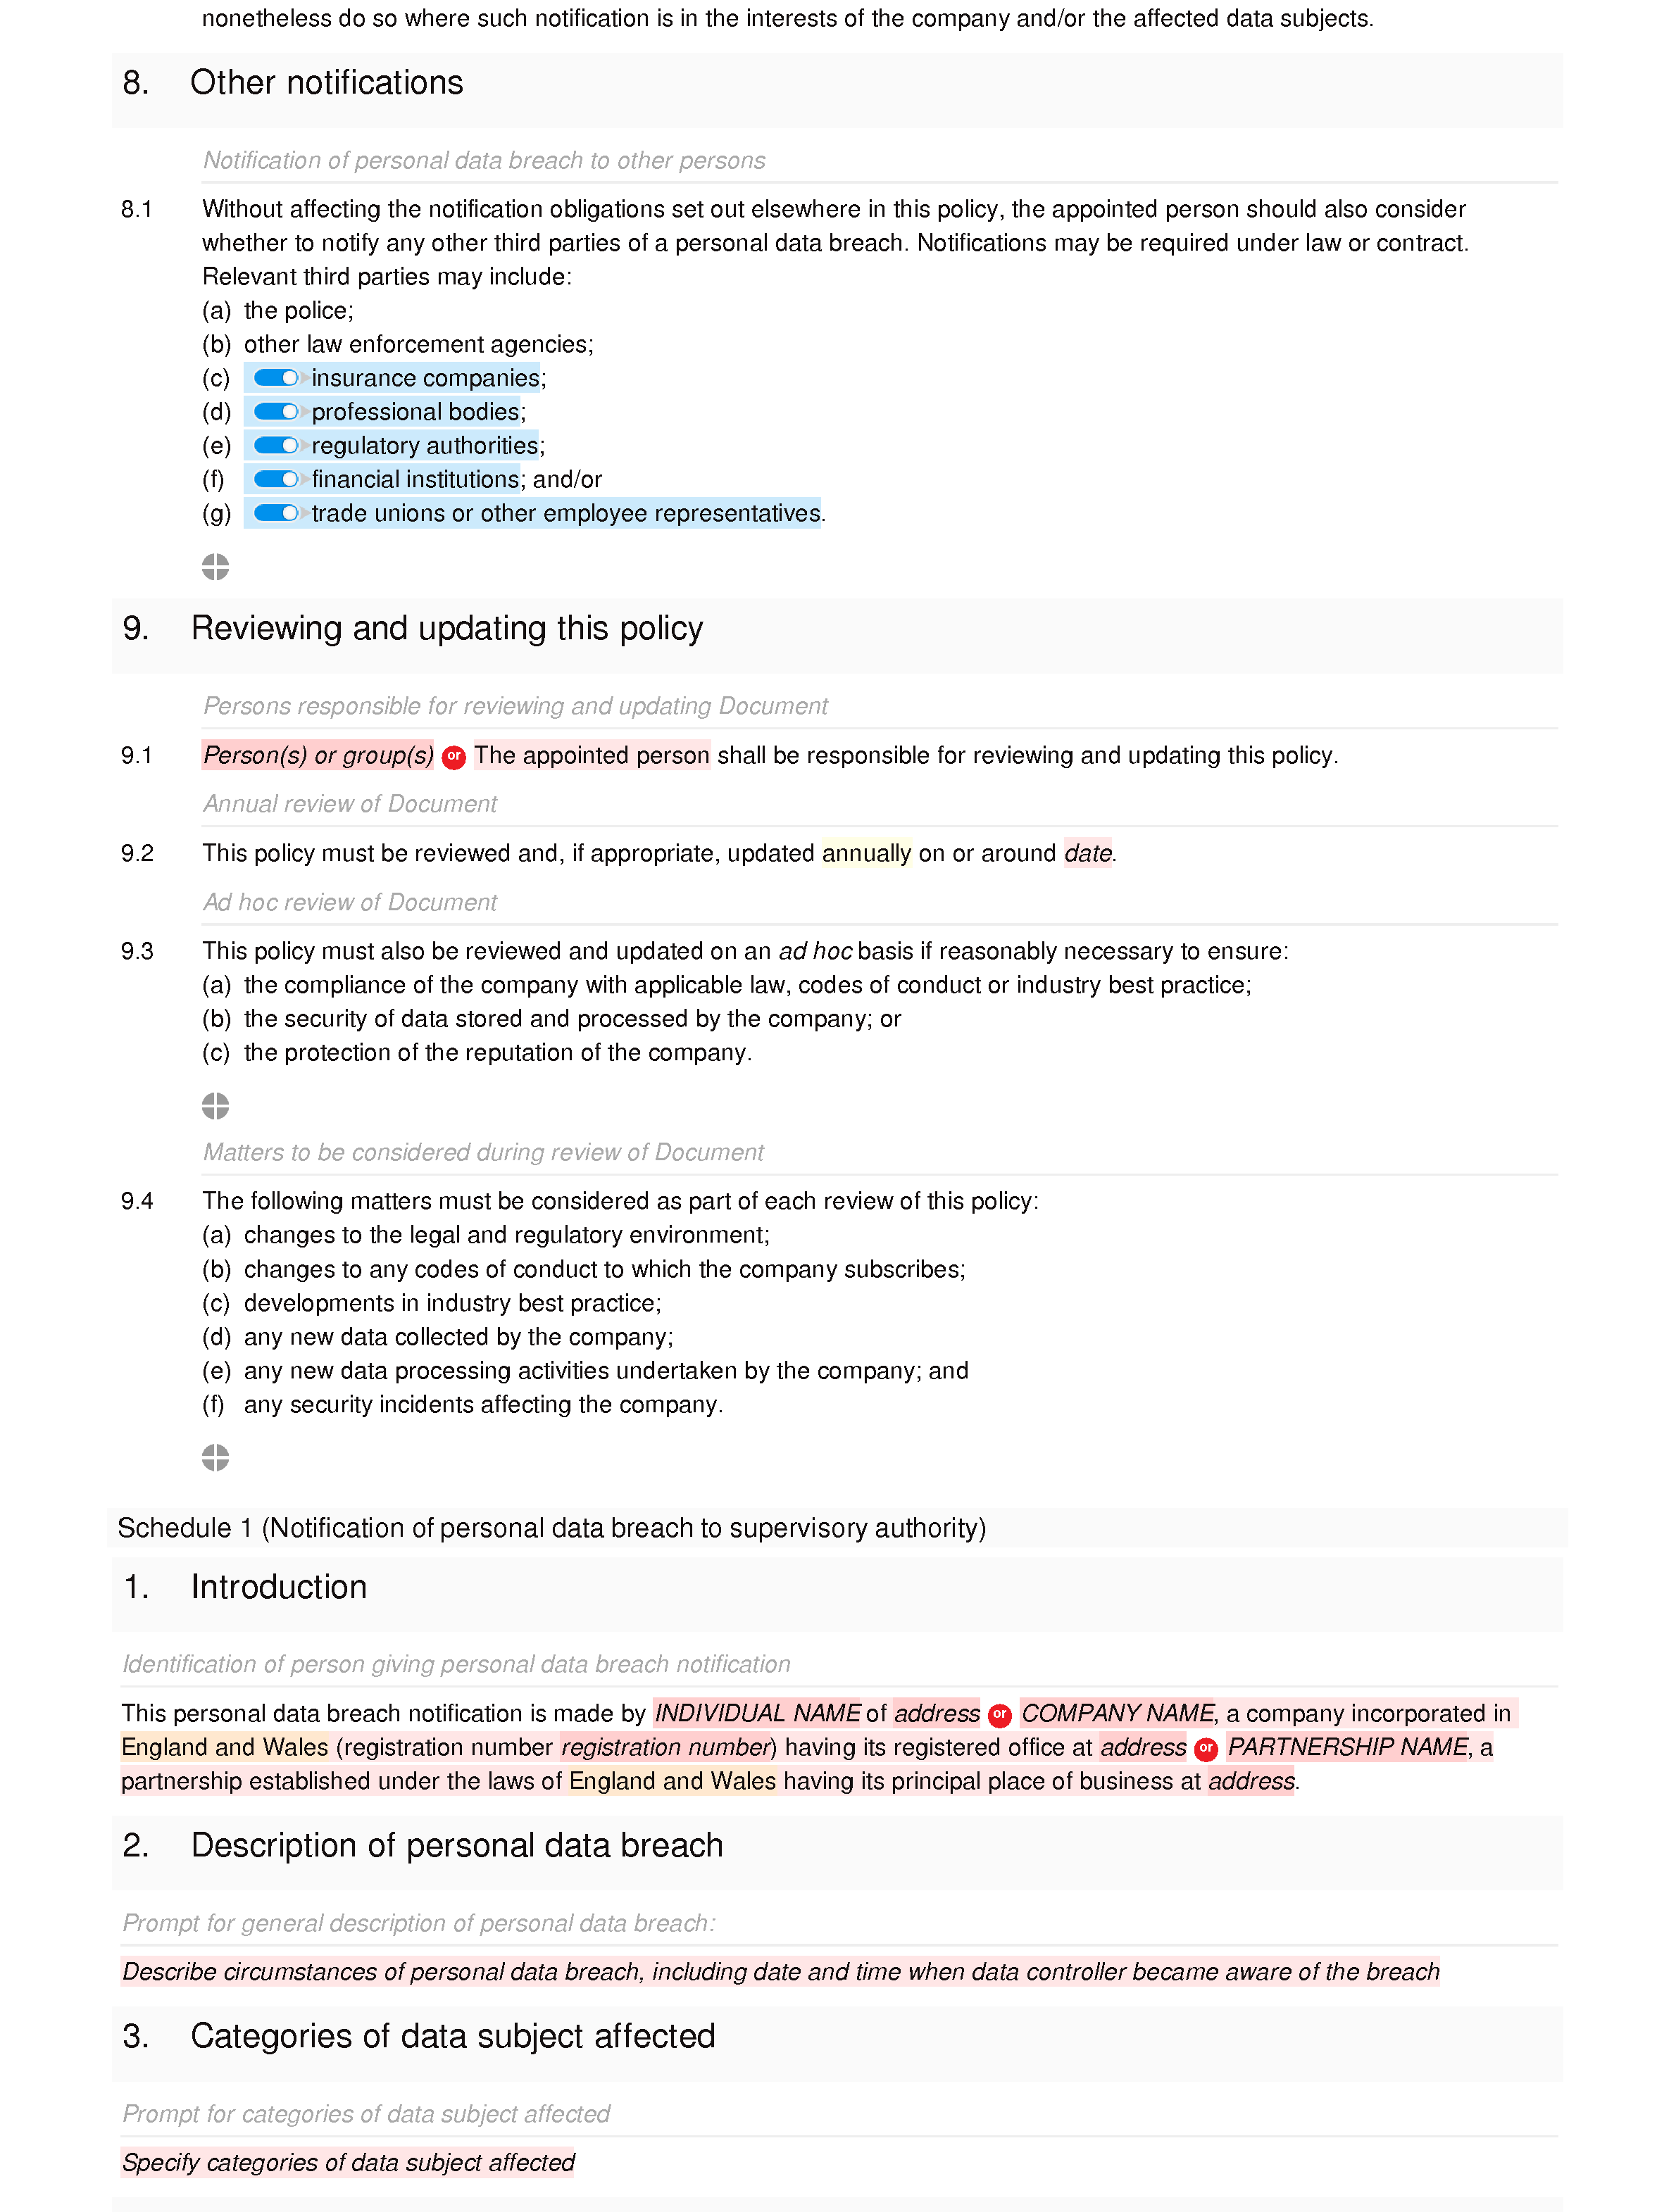 Personal data breach notification policy document editor preview